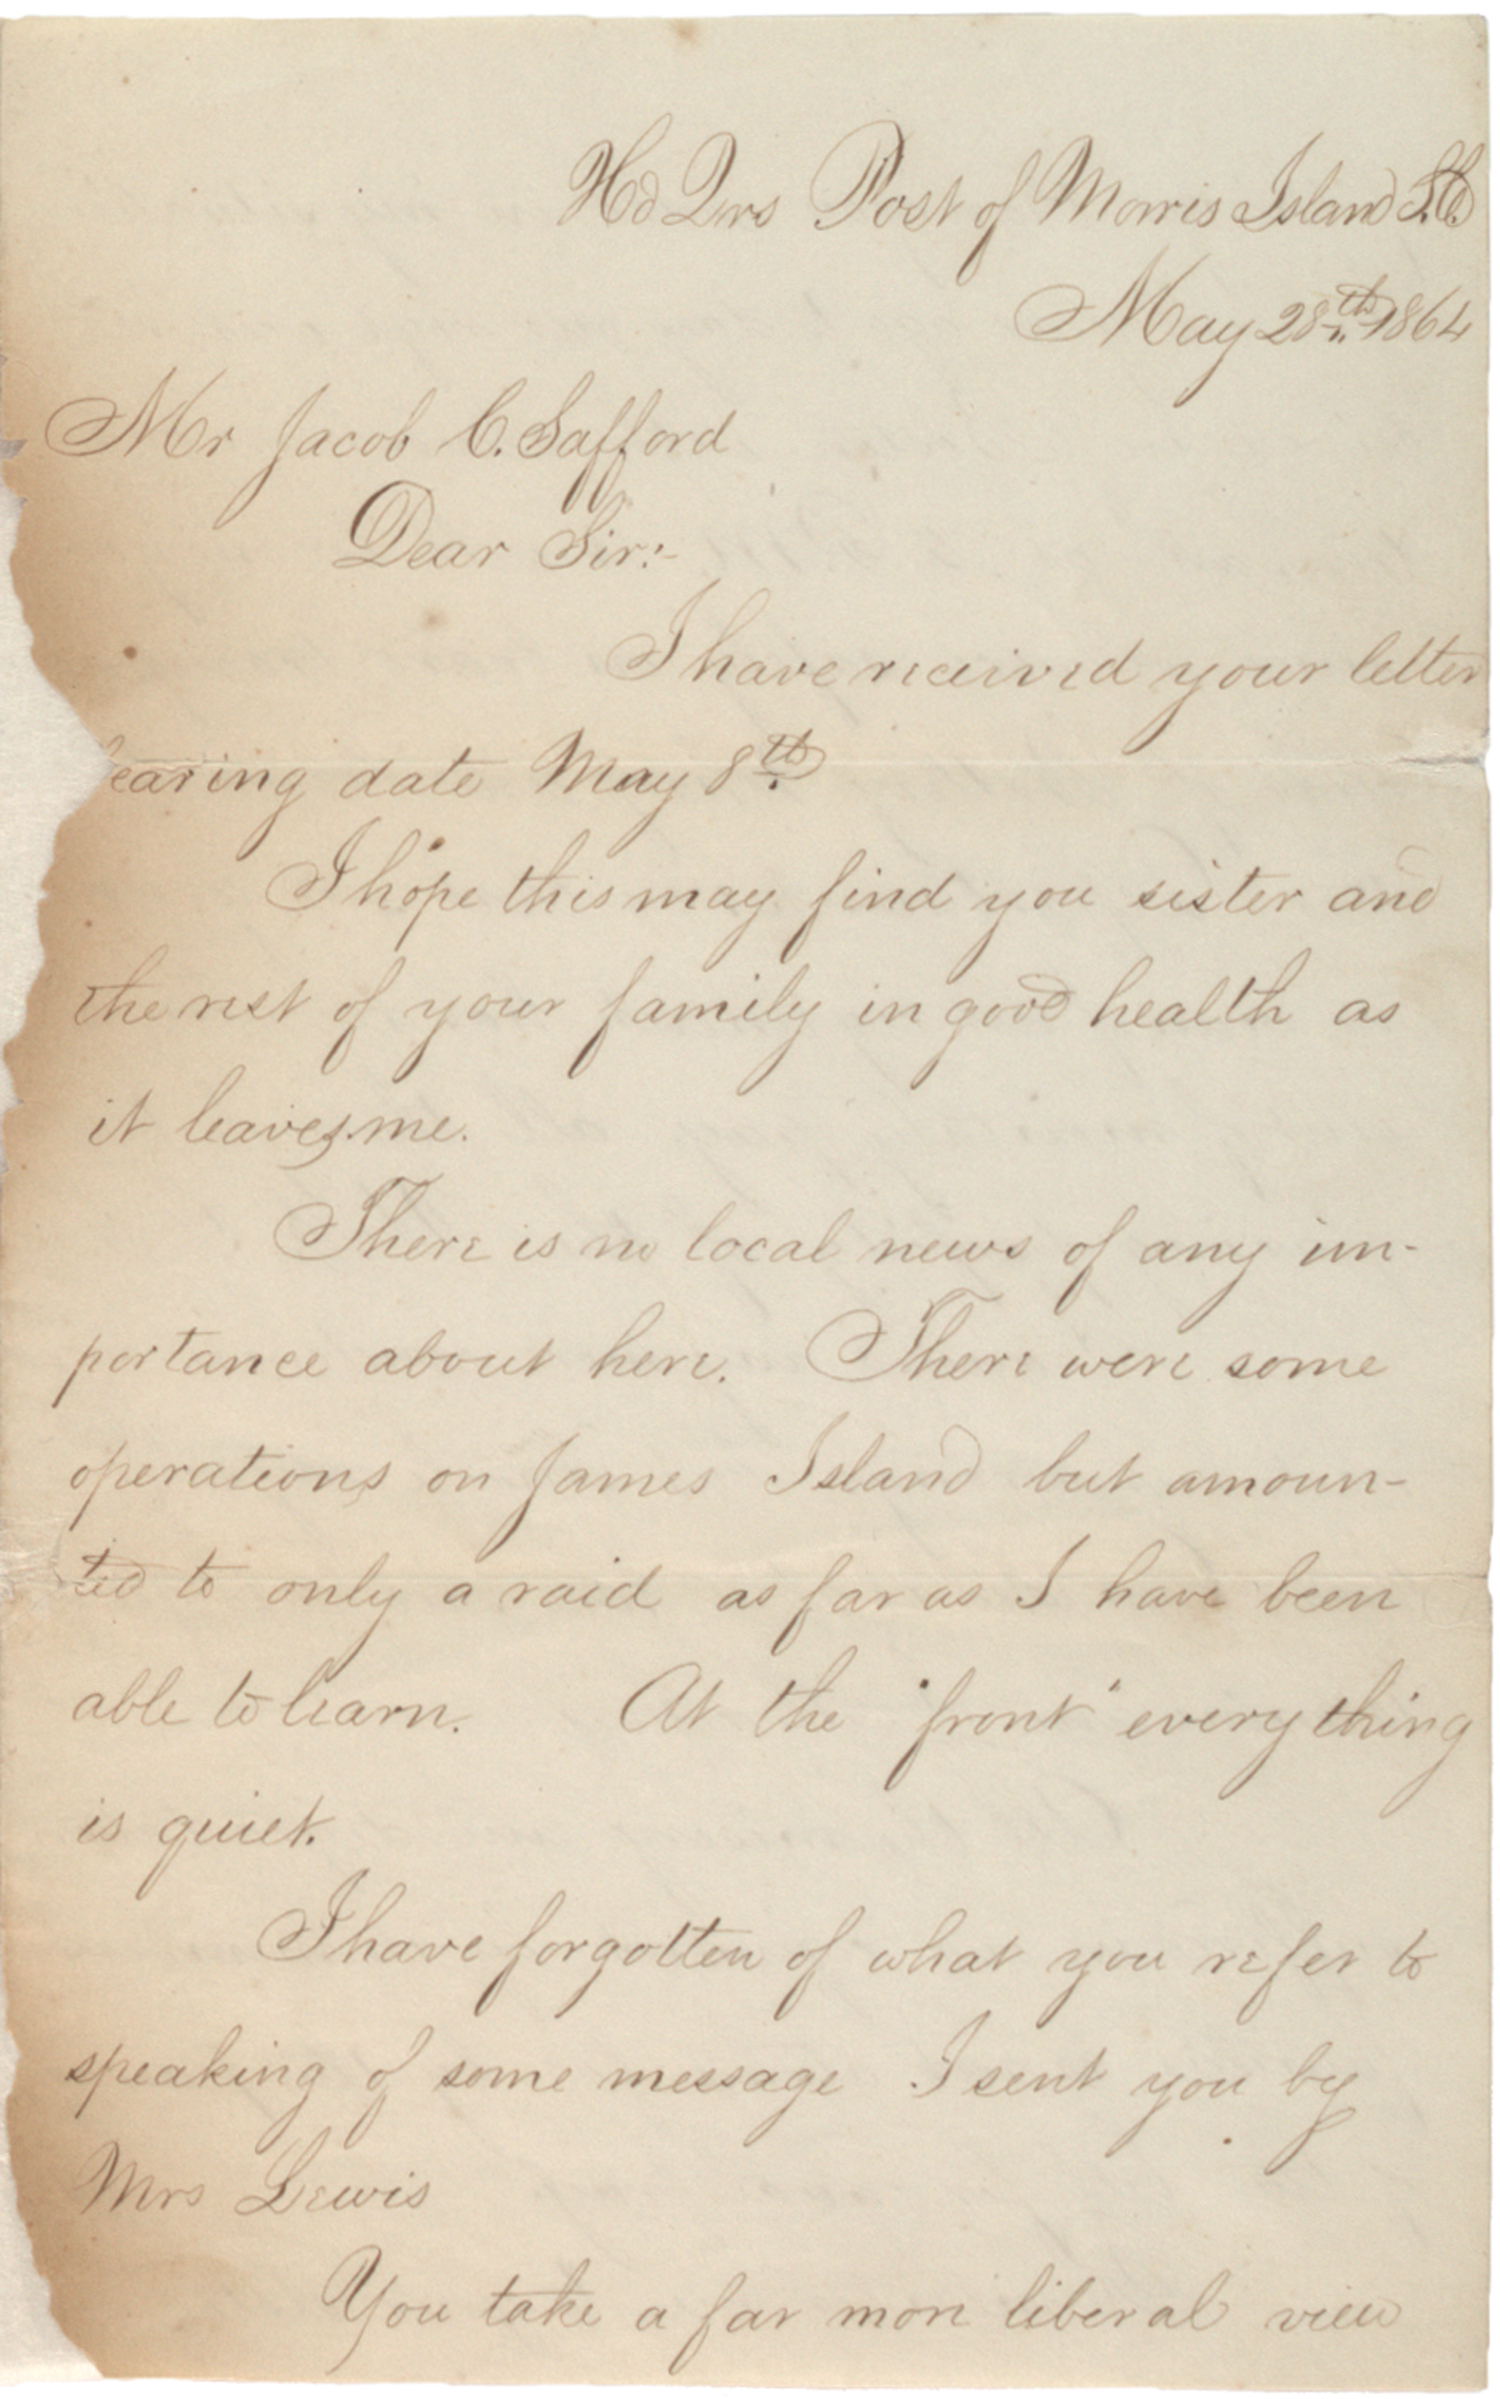 A letter from Francis Fletcher of the 54th Infantry Regiment, 1864 (The Gilder Lehrman Institute, GLC07345)